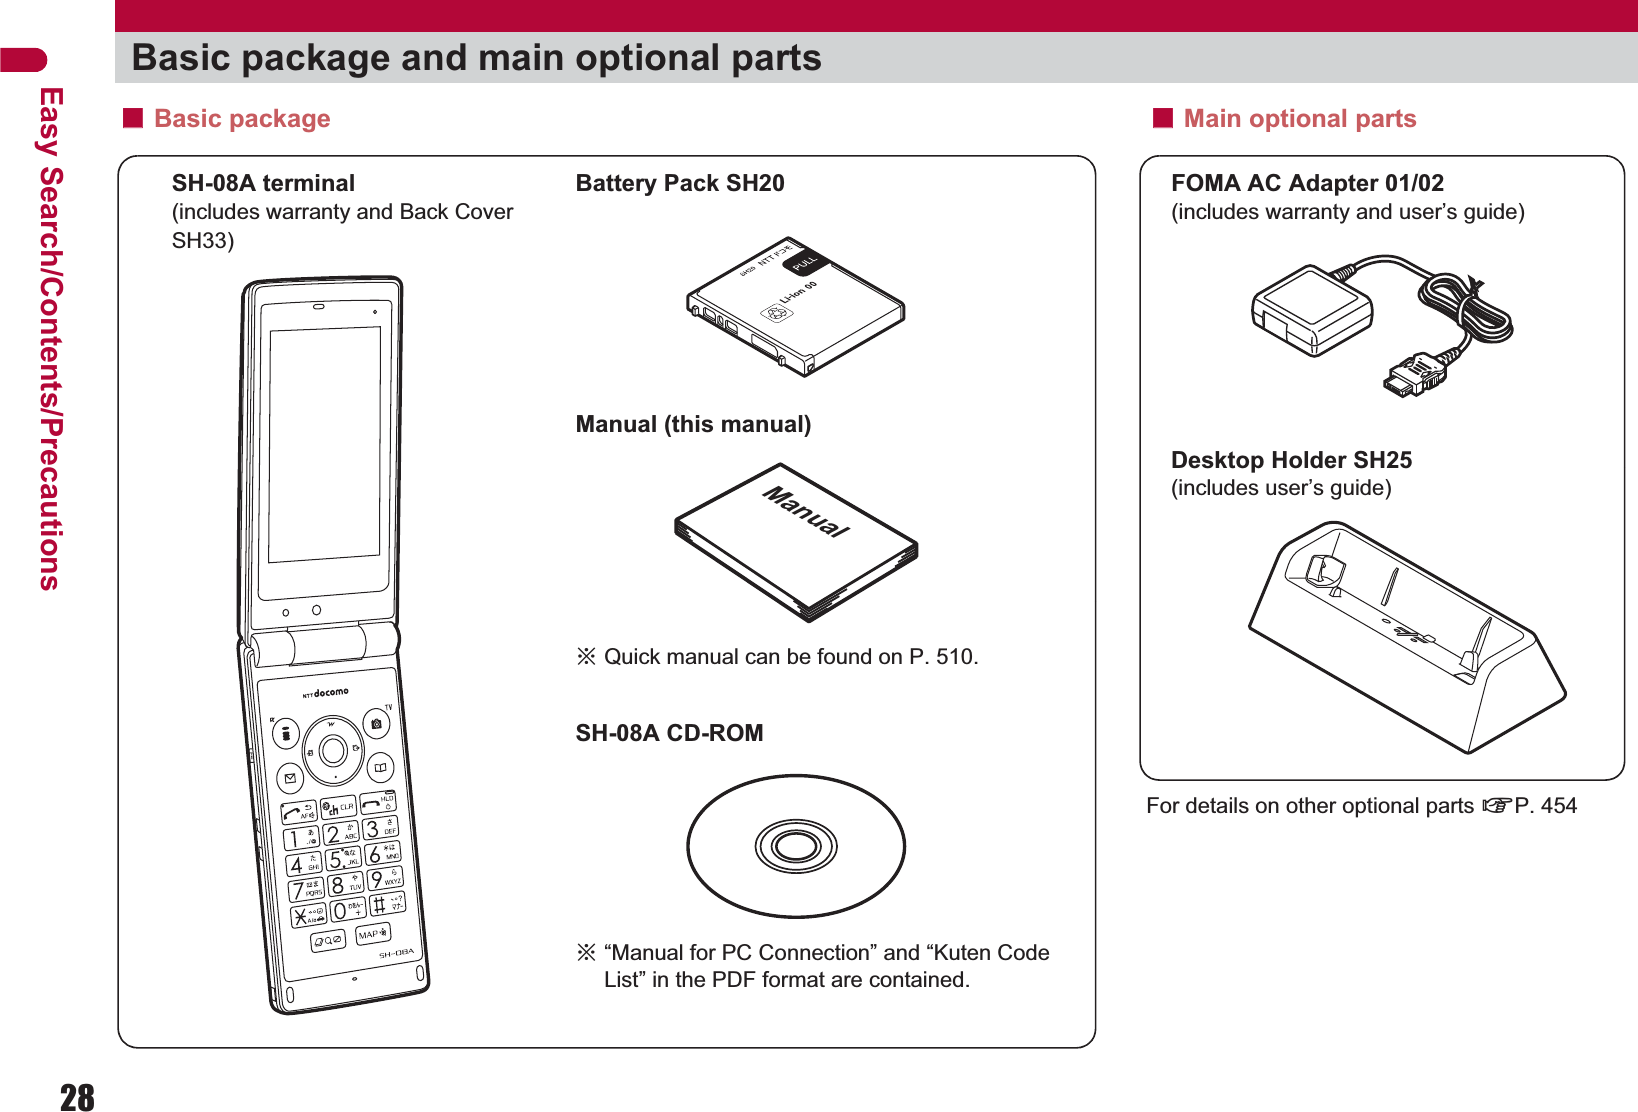 28Easy Search/Contents/PrecautionsBasic package and main optional partsSH-08A terminal(includes warranty and Back Cover SH33)ɦ“Manual for PC Connection” and “Kuten Code List” in the PDF format are contained.ɡɡBasic packageFOMA AC Adapter 01/02(includes warranty and user’s guide)Desktop Holder SH25(includes user’s guide)Battery Pack SH20ɡɡMain optional partsManual (this manual)SH-08A CD-ROMFor details on other optional parts nP. 454ManualɦQuick manual can be found on P. 510.